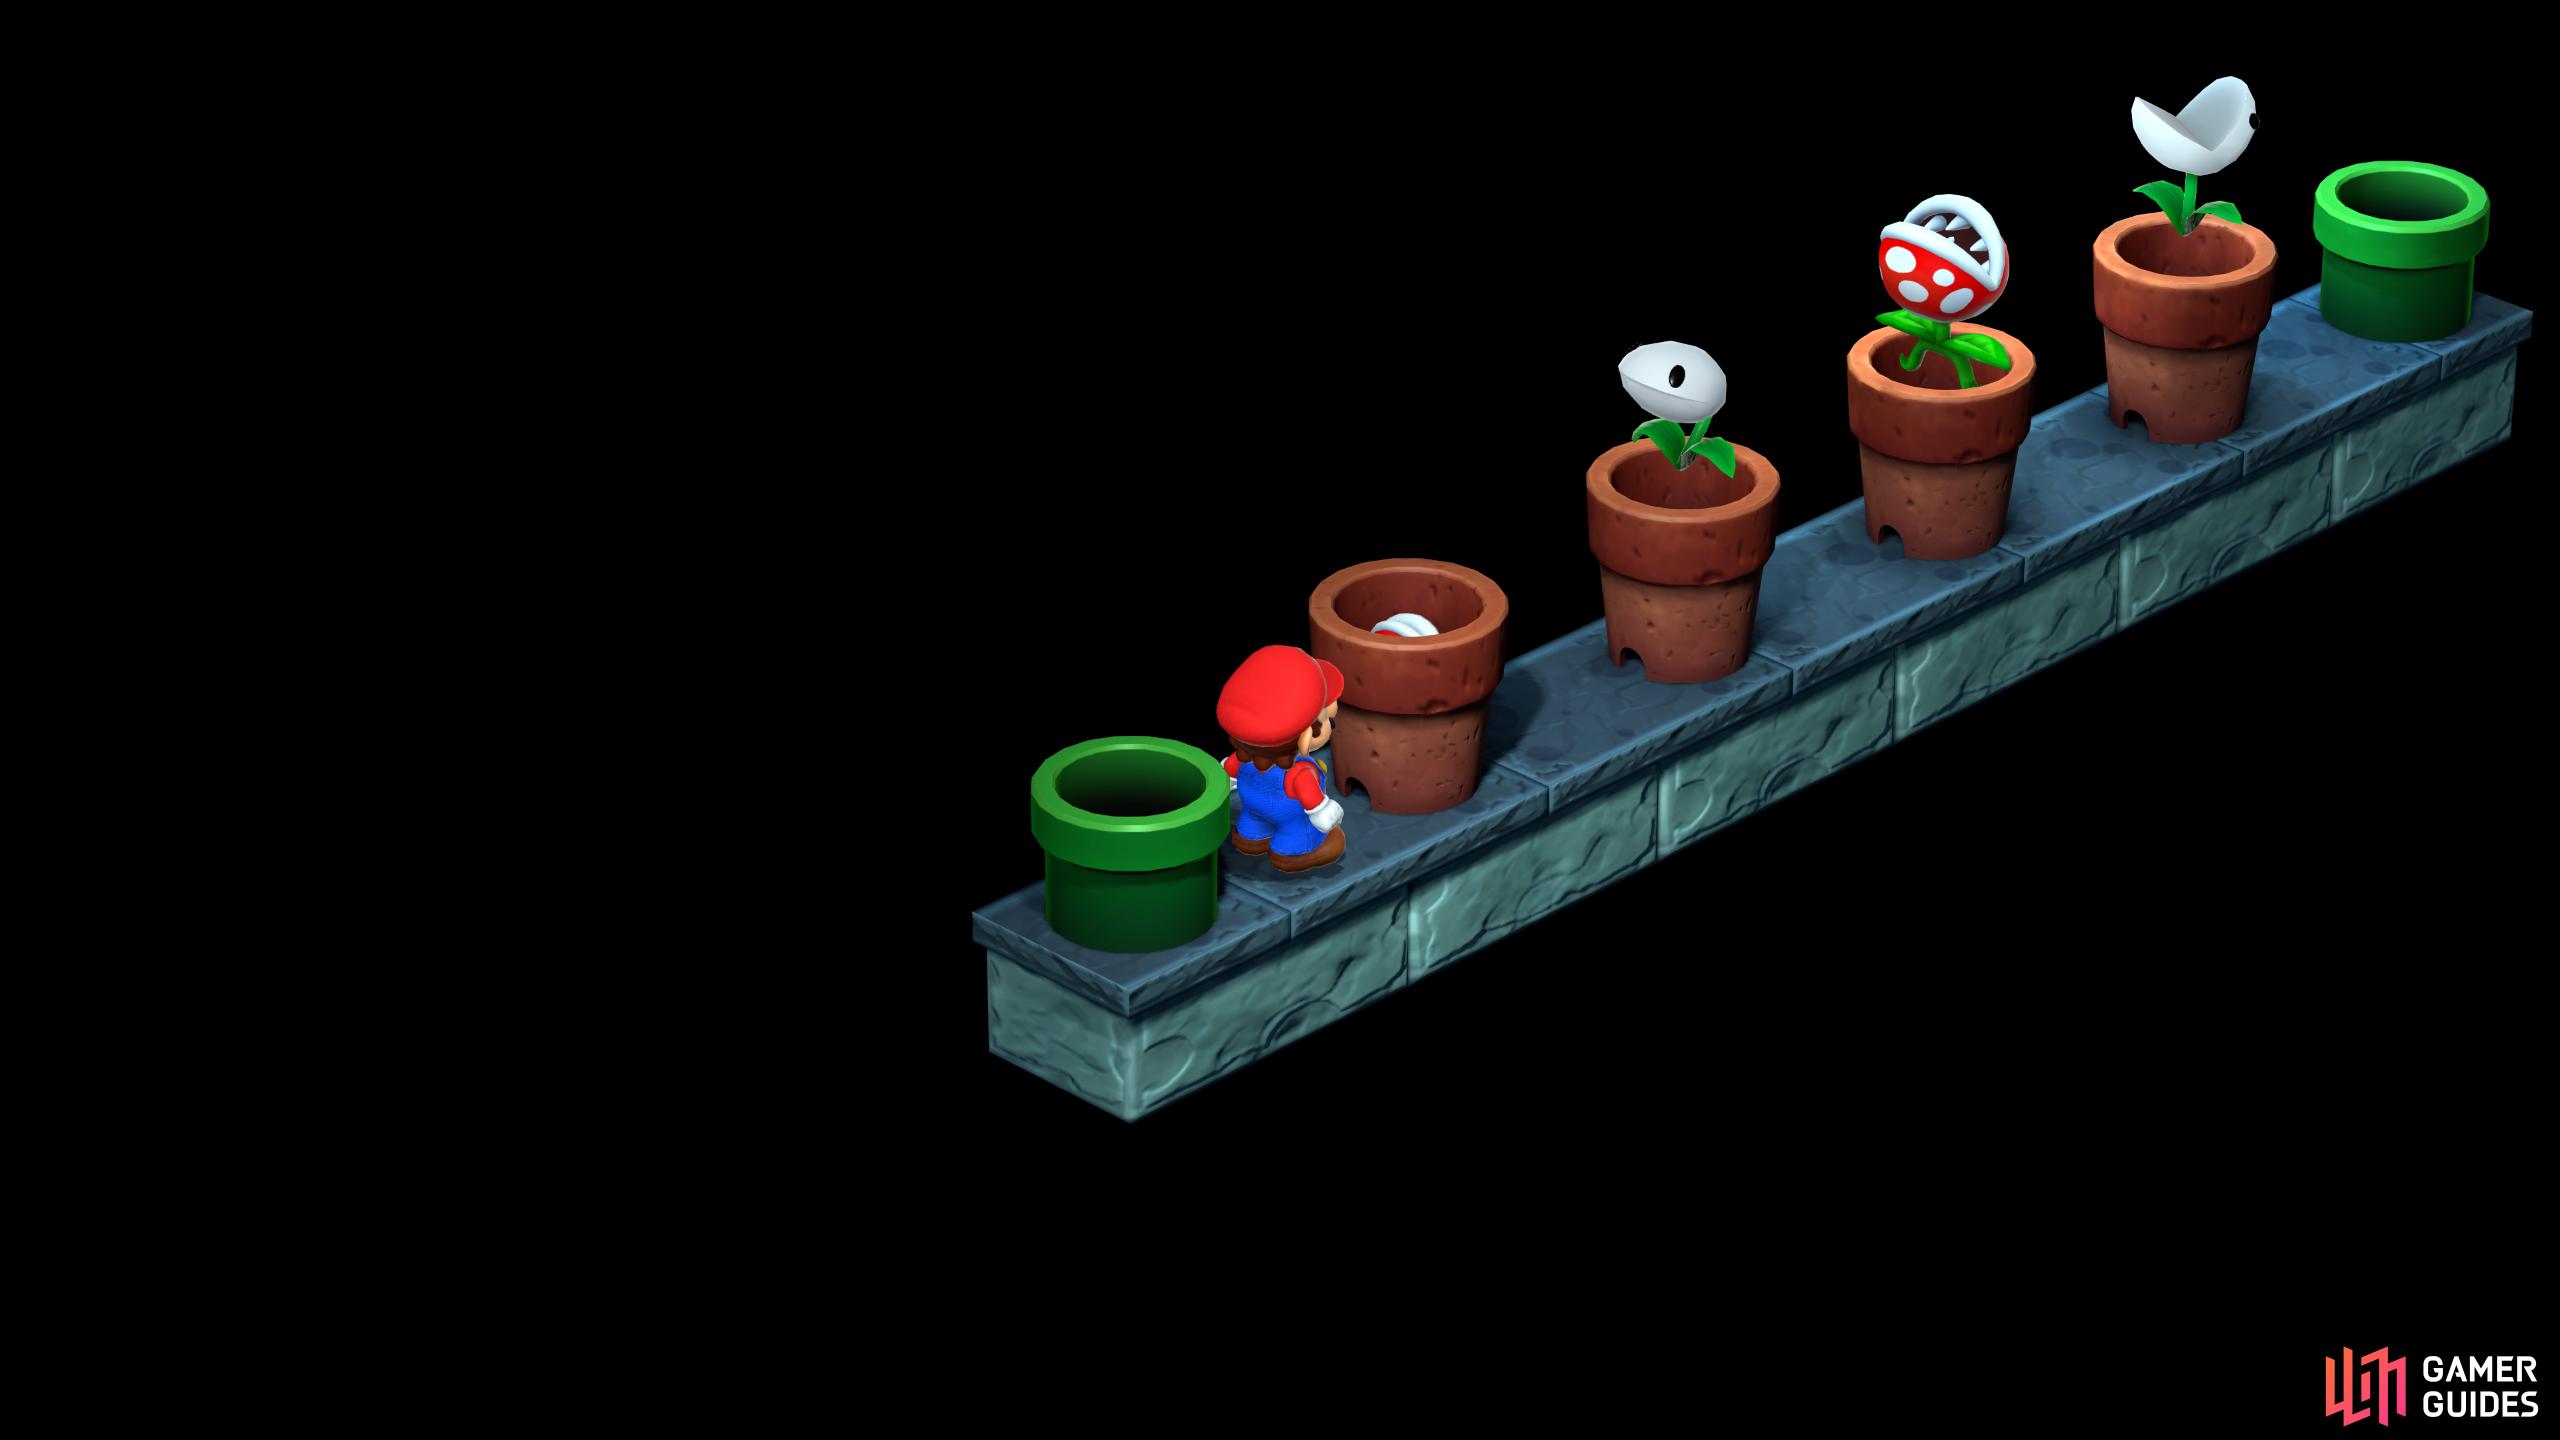 Use the brown pots to jump over the white flowers and take the pipe down at the end.